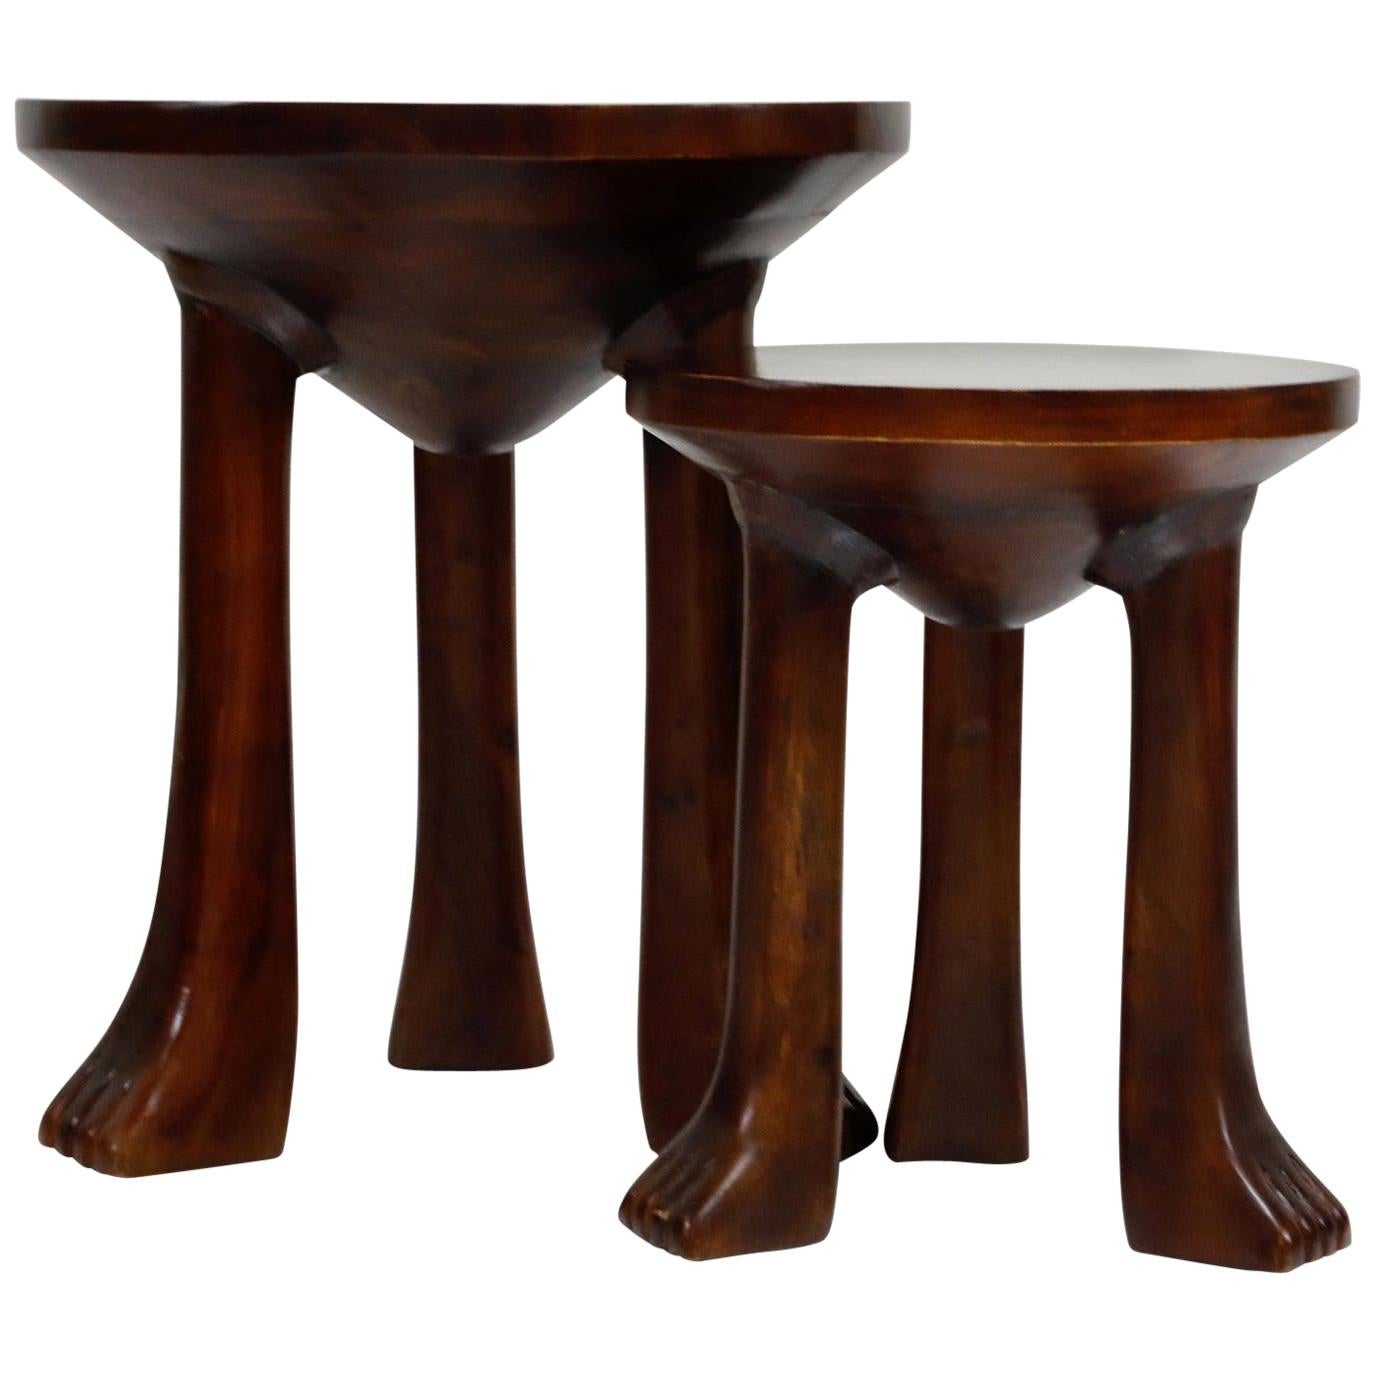 Carved Teak Three-Legged Lionfoot Side Tables in the Style of John Dickinson